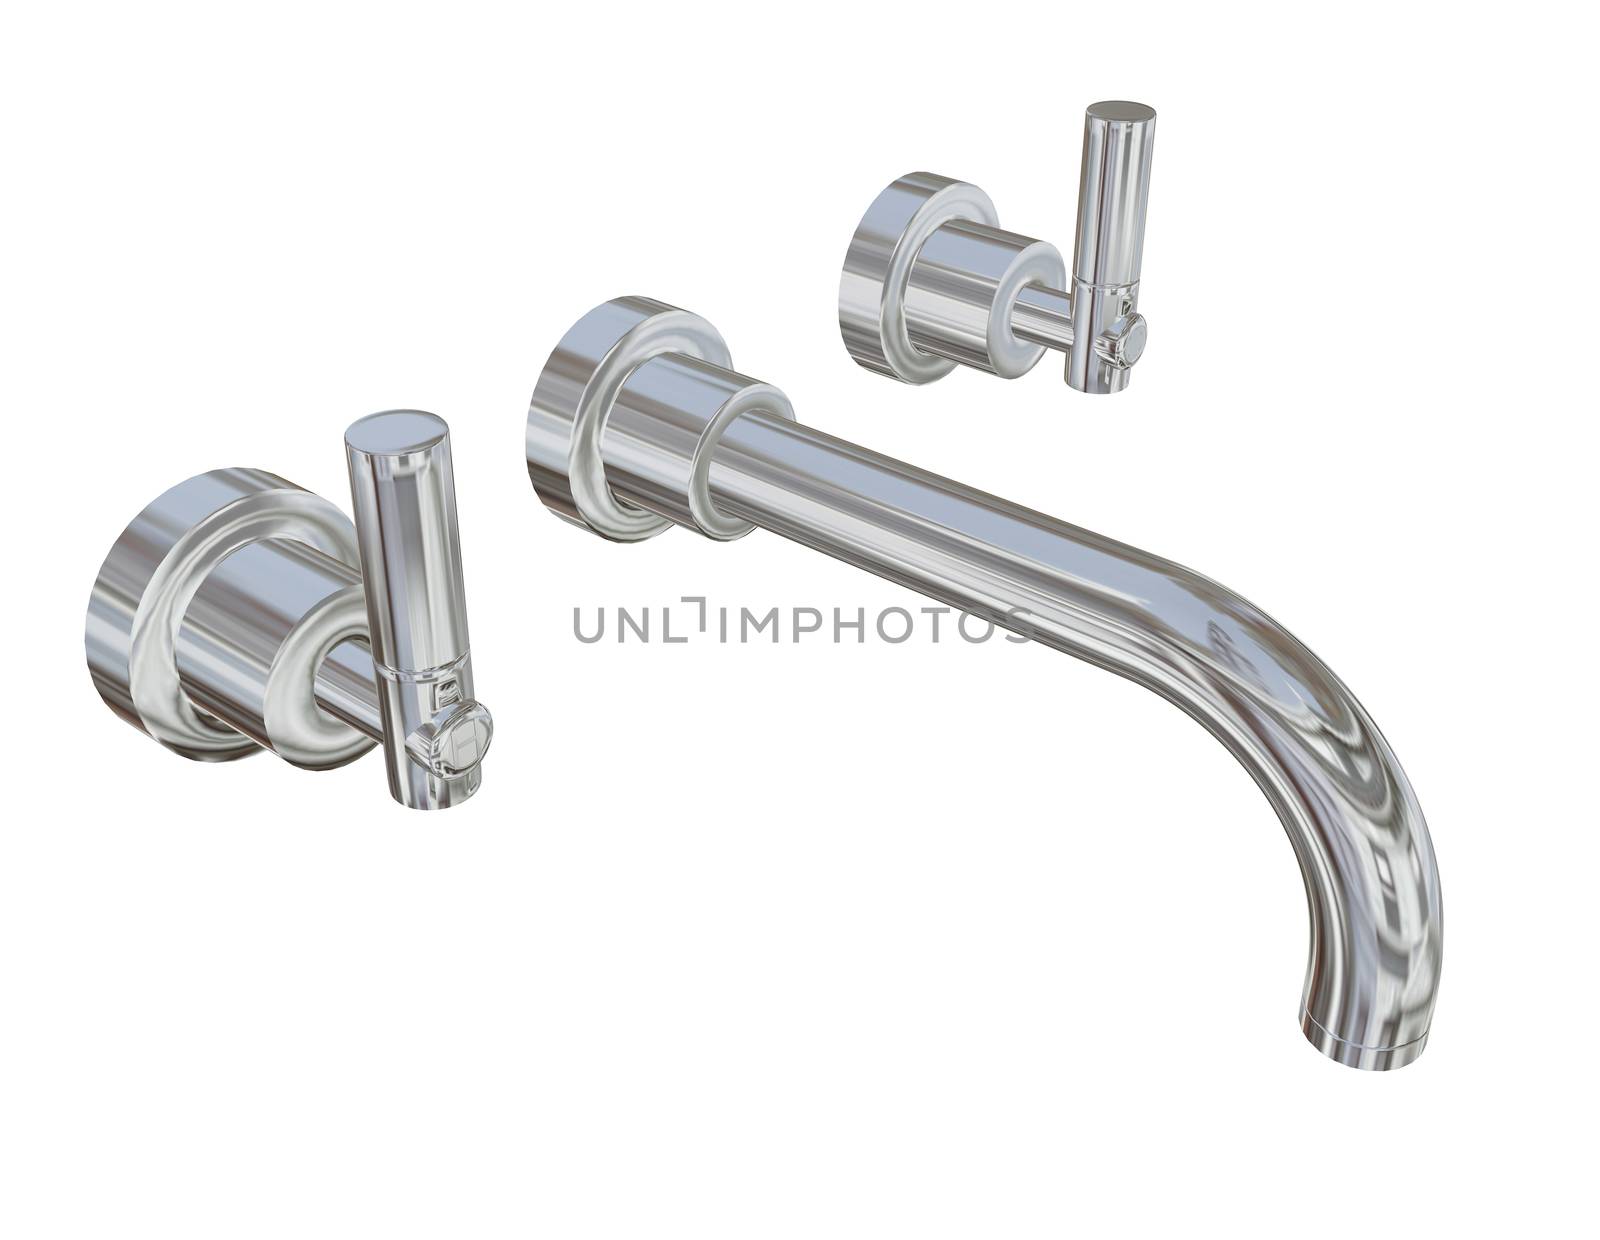 Modern faucet with chrome or stainless steel finishing, 3d illus by Morphart